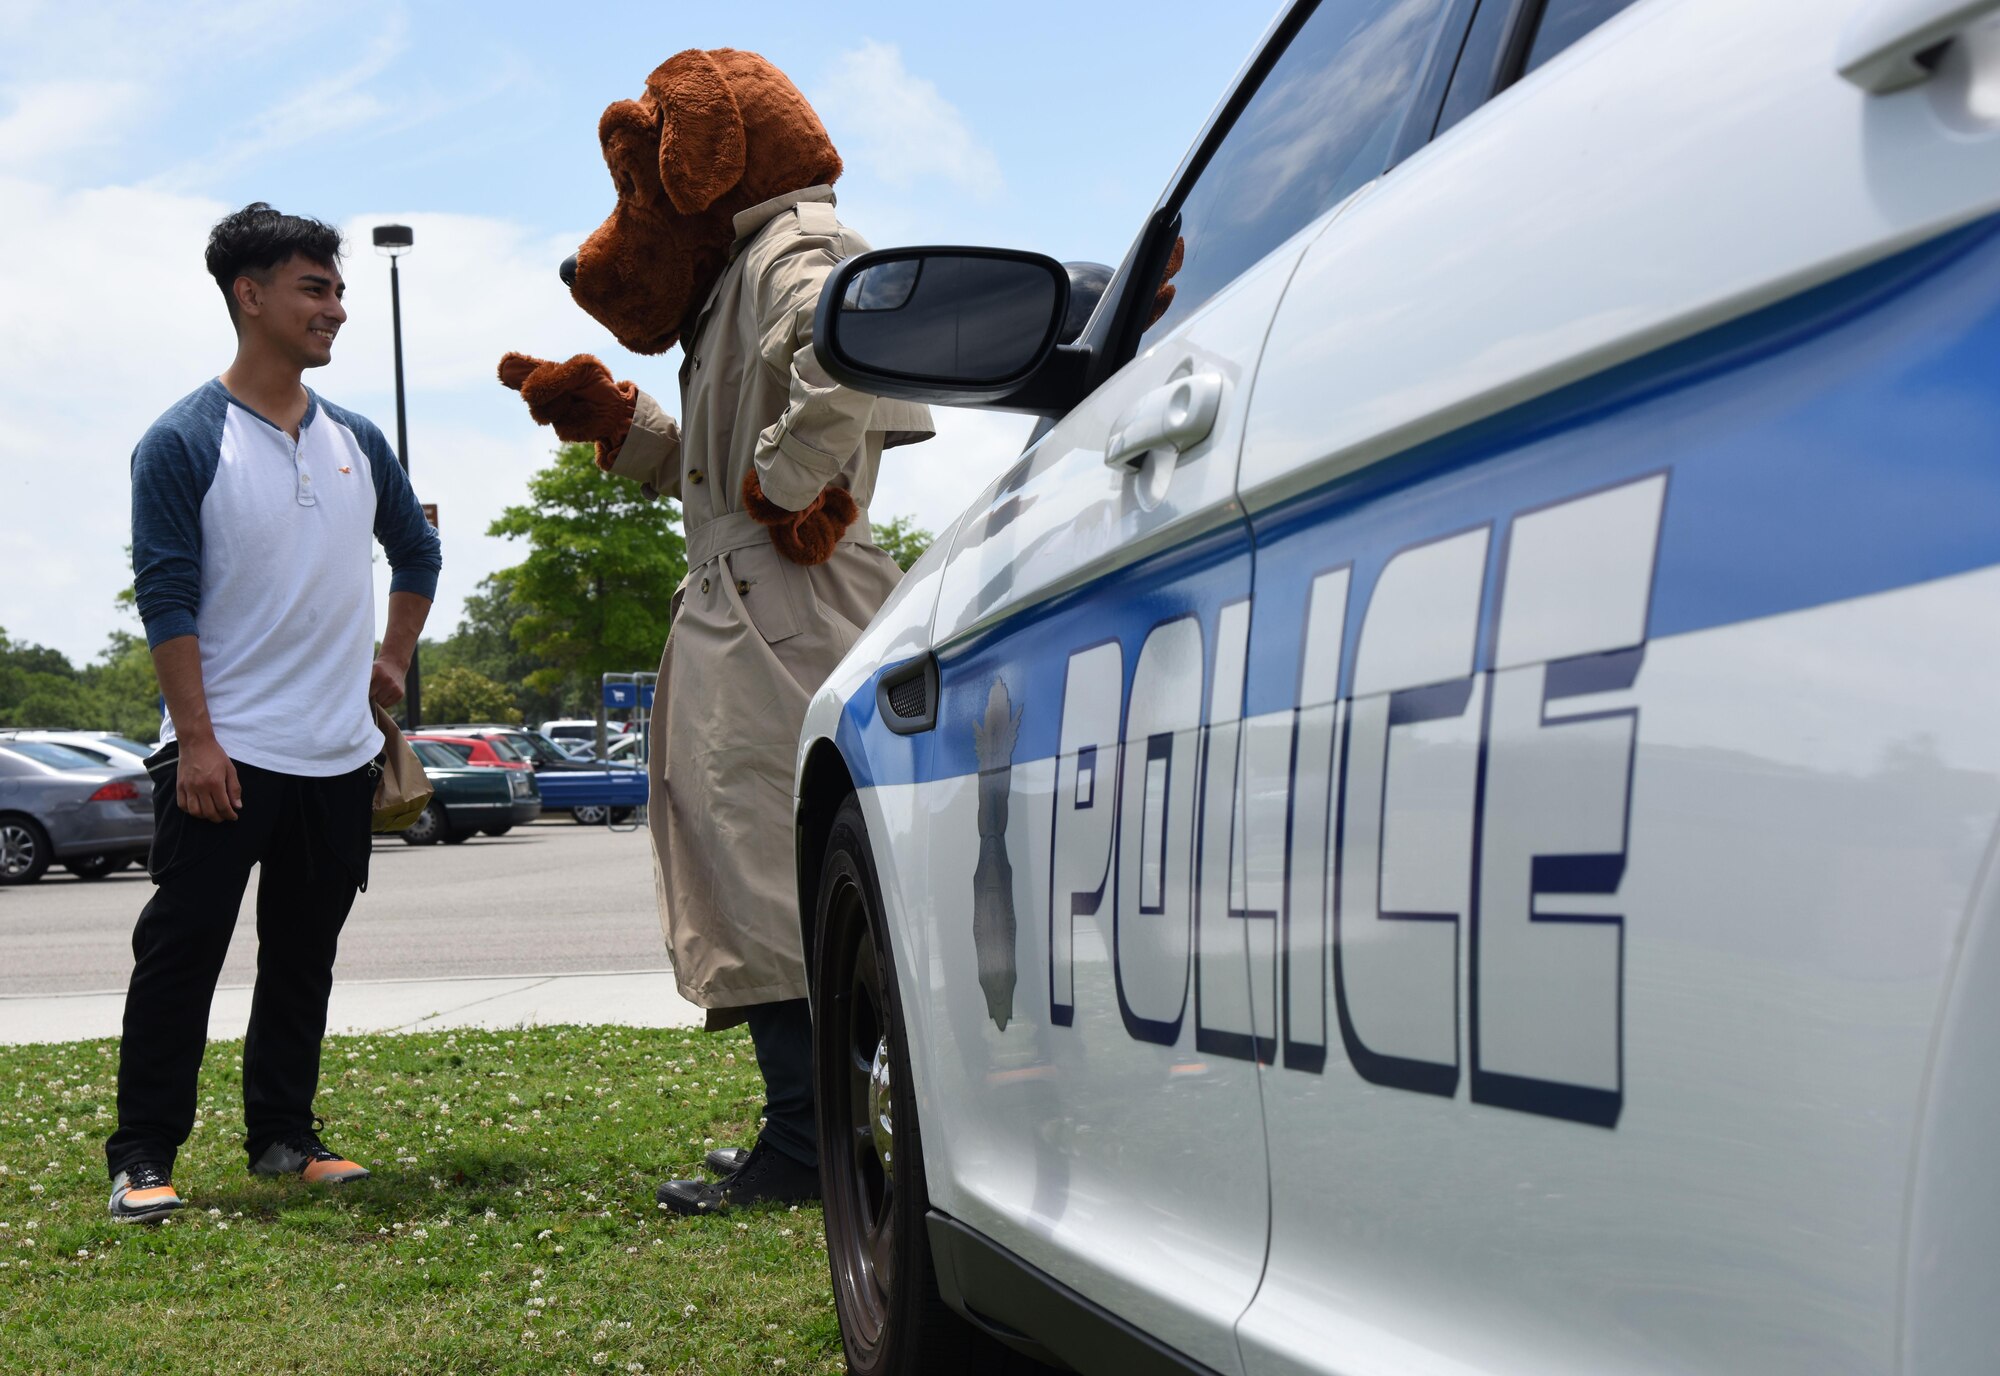 Airman 1st Class Devon Montoya, 81st Diagnostic and Therapeutic Squadron radiologic technician, talks with McGruff, the crime dog, during the 81st Security Forces Squadron Police Week fun day at the Base Exchange May 18, 2017, on Keesler Air Force Base, Miss. The event was held during National Police Week, which recognizes the service of law enforcement men and women who put their lives at risk every day. (U.S. Air Force photo by Kemberly Groue)